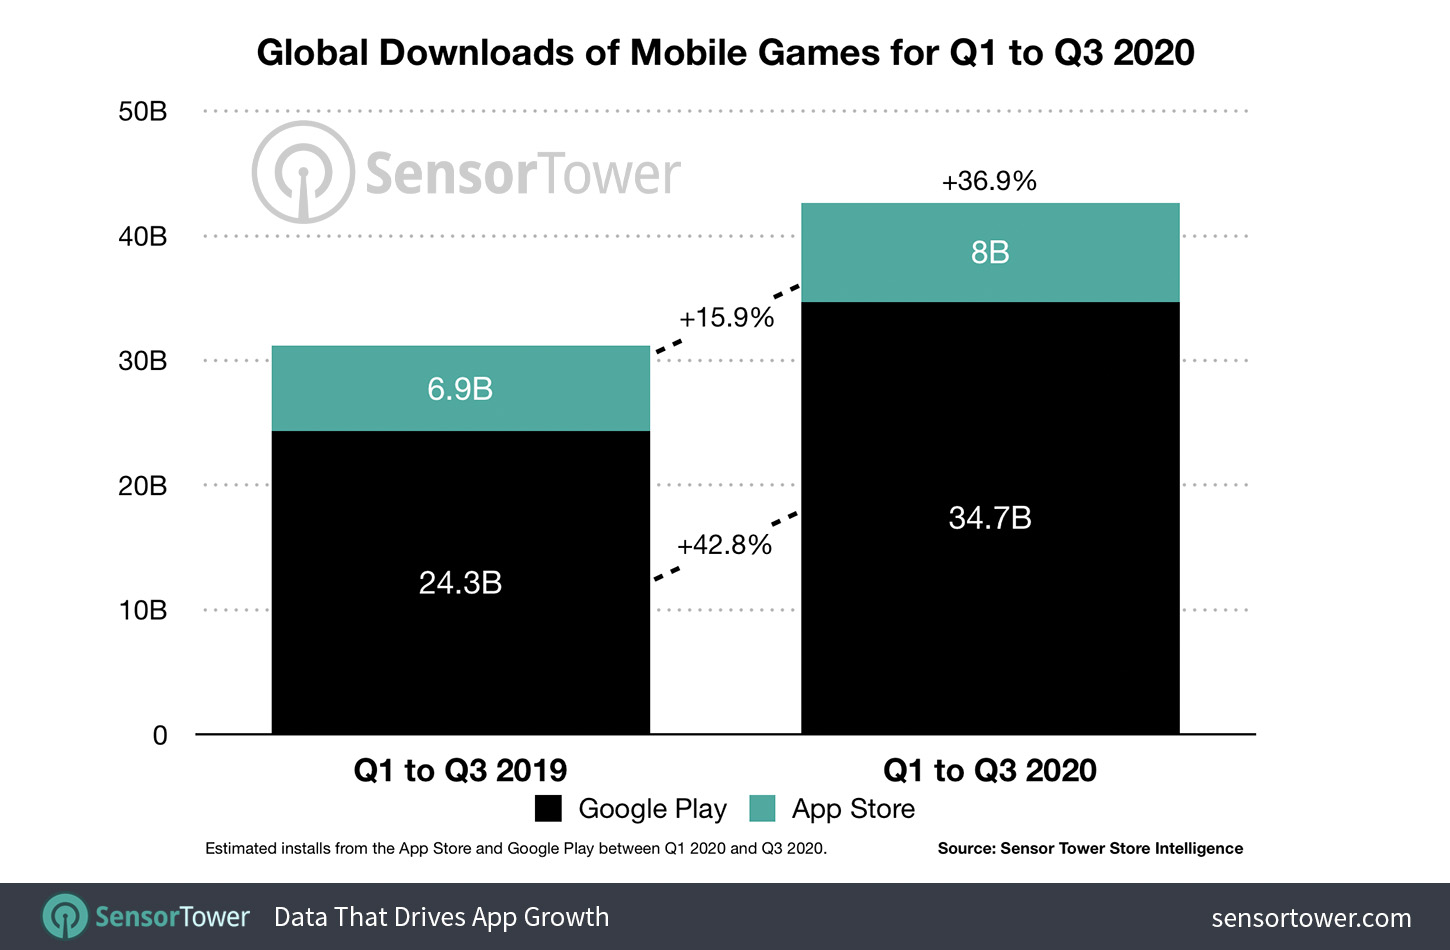 Global Downloads of Mobile Games for Q1 to Q3 2020